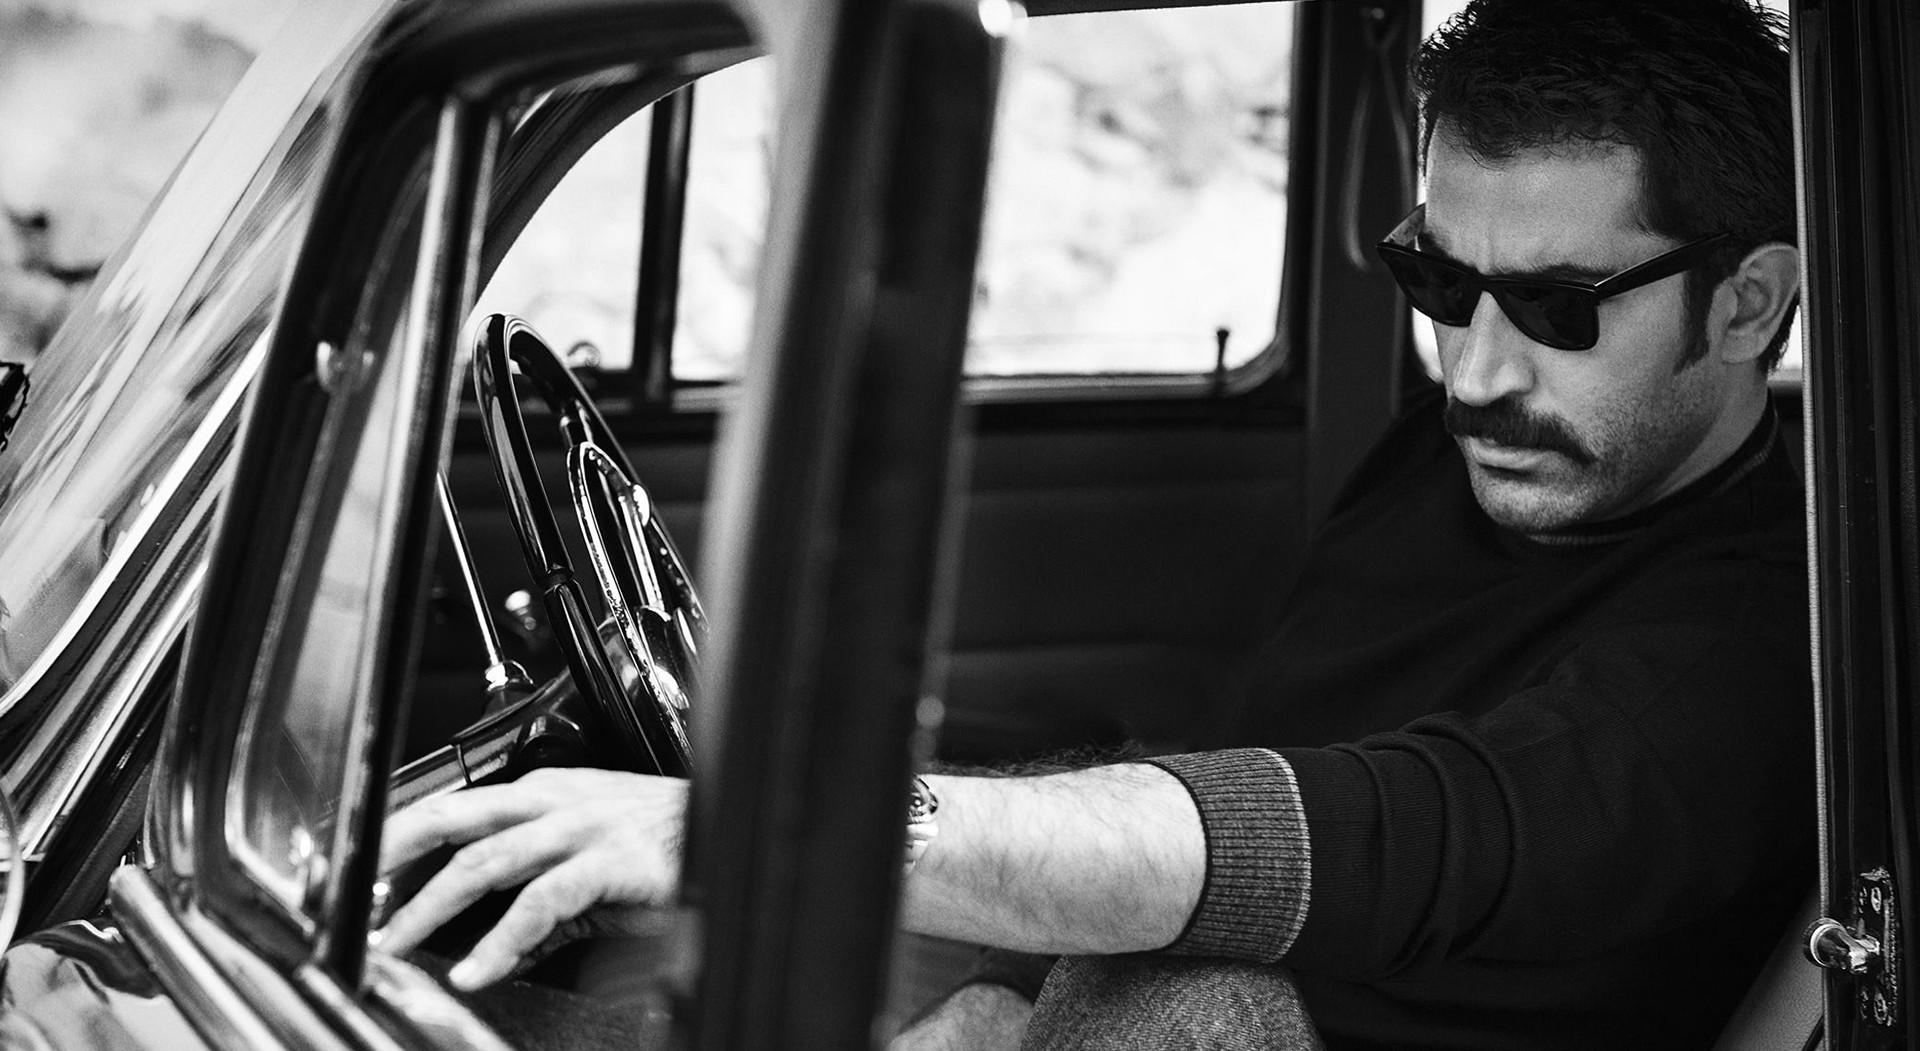 People 1920x1051 Kenan Imirzalıoğlu actor model moustache car classic car goggles monochrome sunglasses vehicle car interior steering wheel men with shades men with cars men